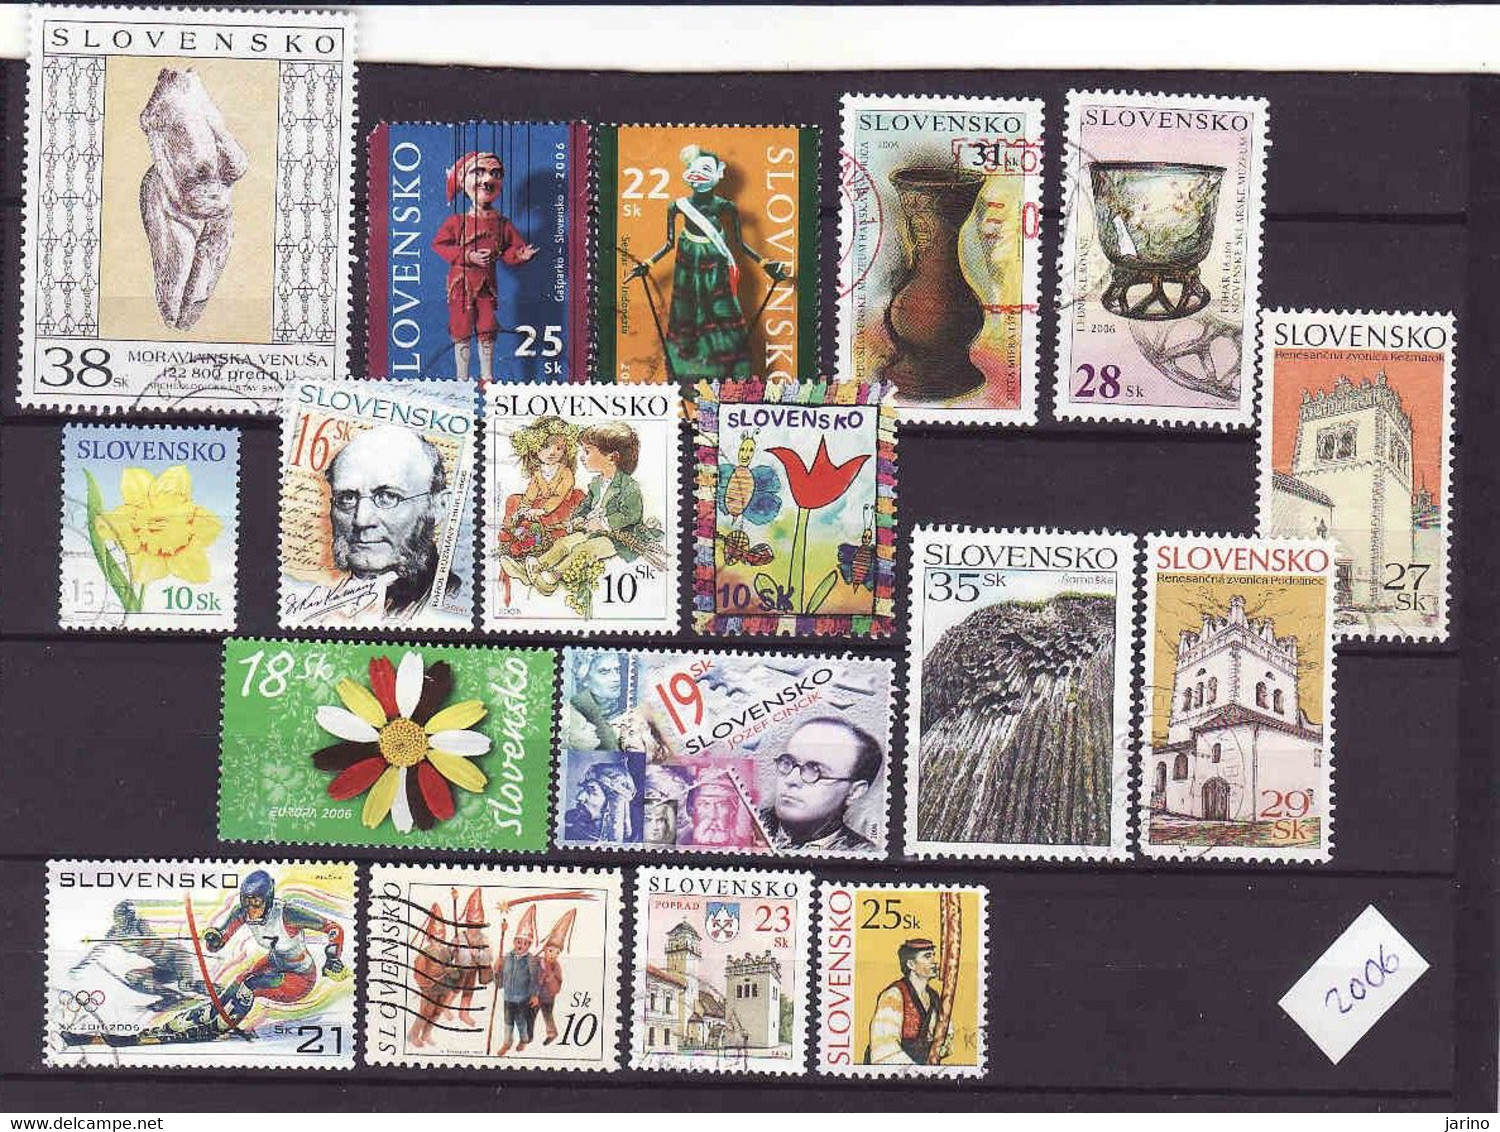 Slovakia-Slovaquie 2006, Used. I Will Complete Your Wantlist Of Czech Or Slovak Stamps According To The Michel Catalog. - Used Stamps